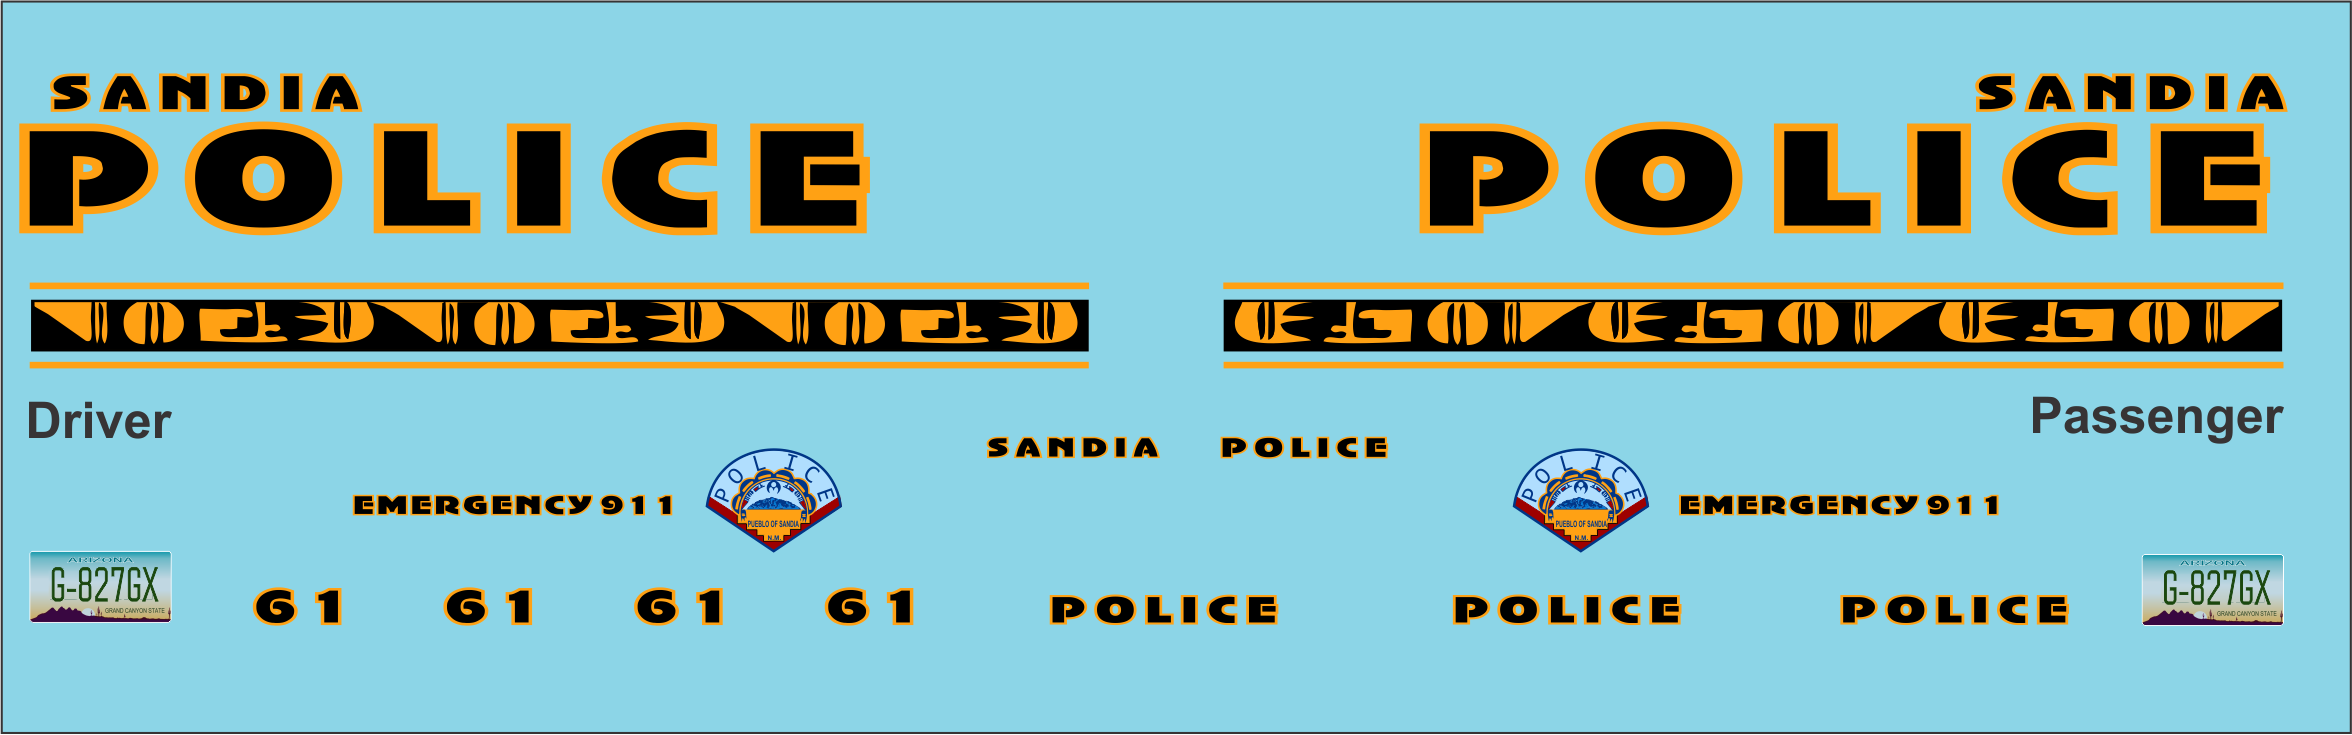 1/24-1/25 Sandia, New Mexico Tribal Police Department waterslide decals